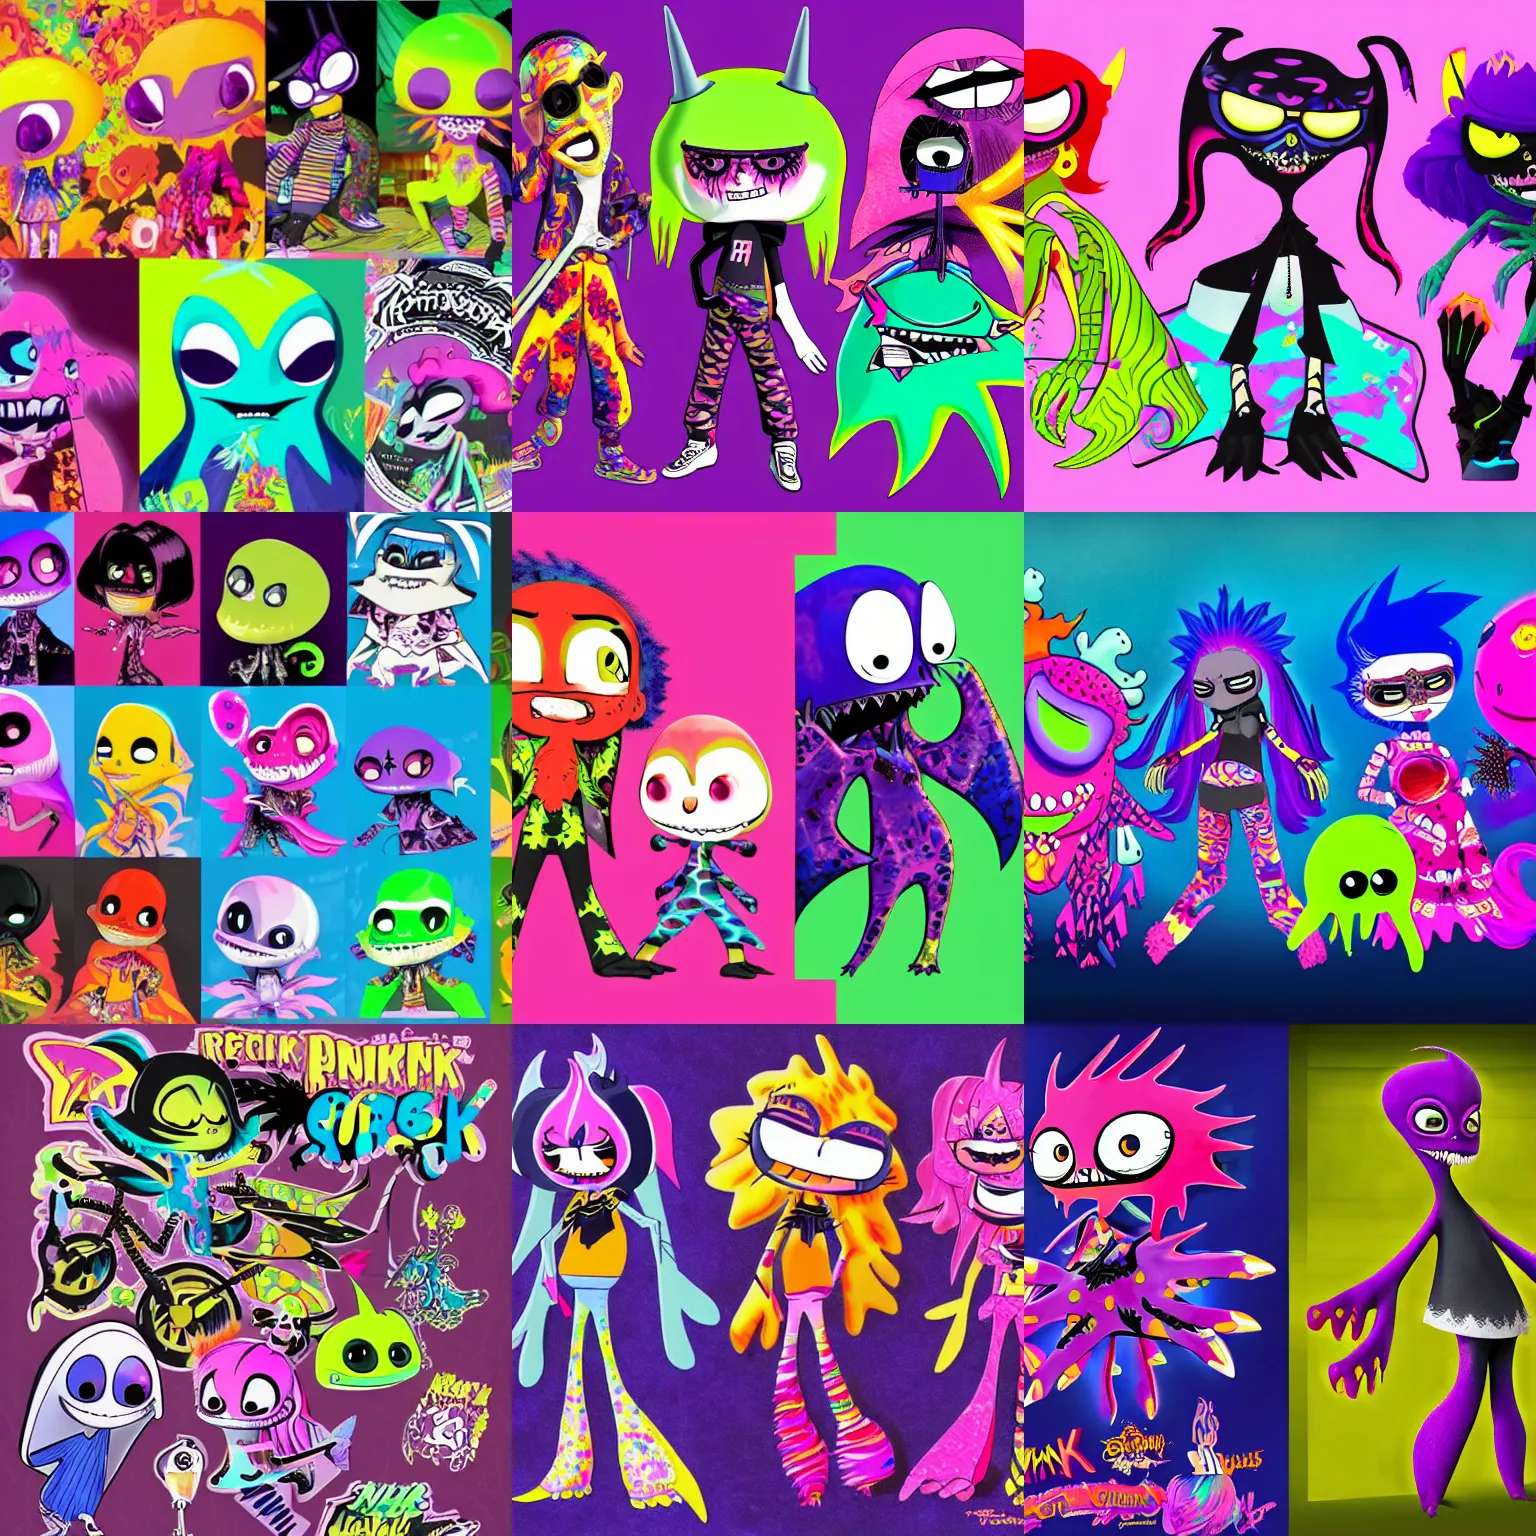 Prompt: lisa frank punk rockstar vampire squid concept character designs of various shapes and sizes by genndy tartakovsky and splatoon by nintendo for the new hotel transylvania